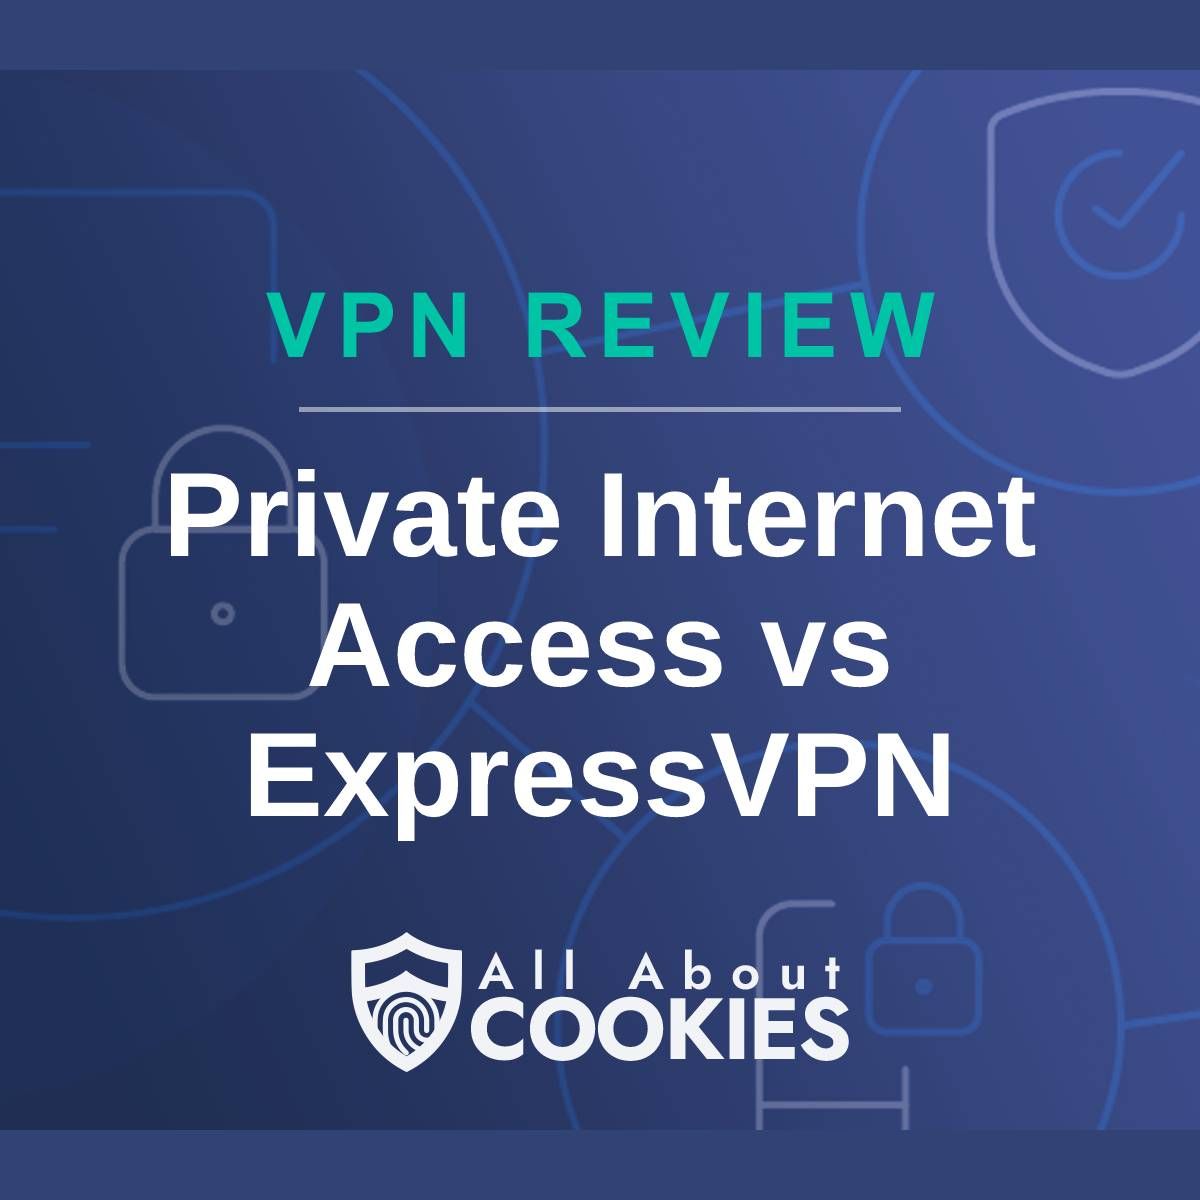 A blue background with images of locks and shields with the text &quot;VPN Review Private Internet Access vs ExpressVPN&quot; and the All About Cookies logo. 